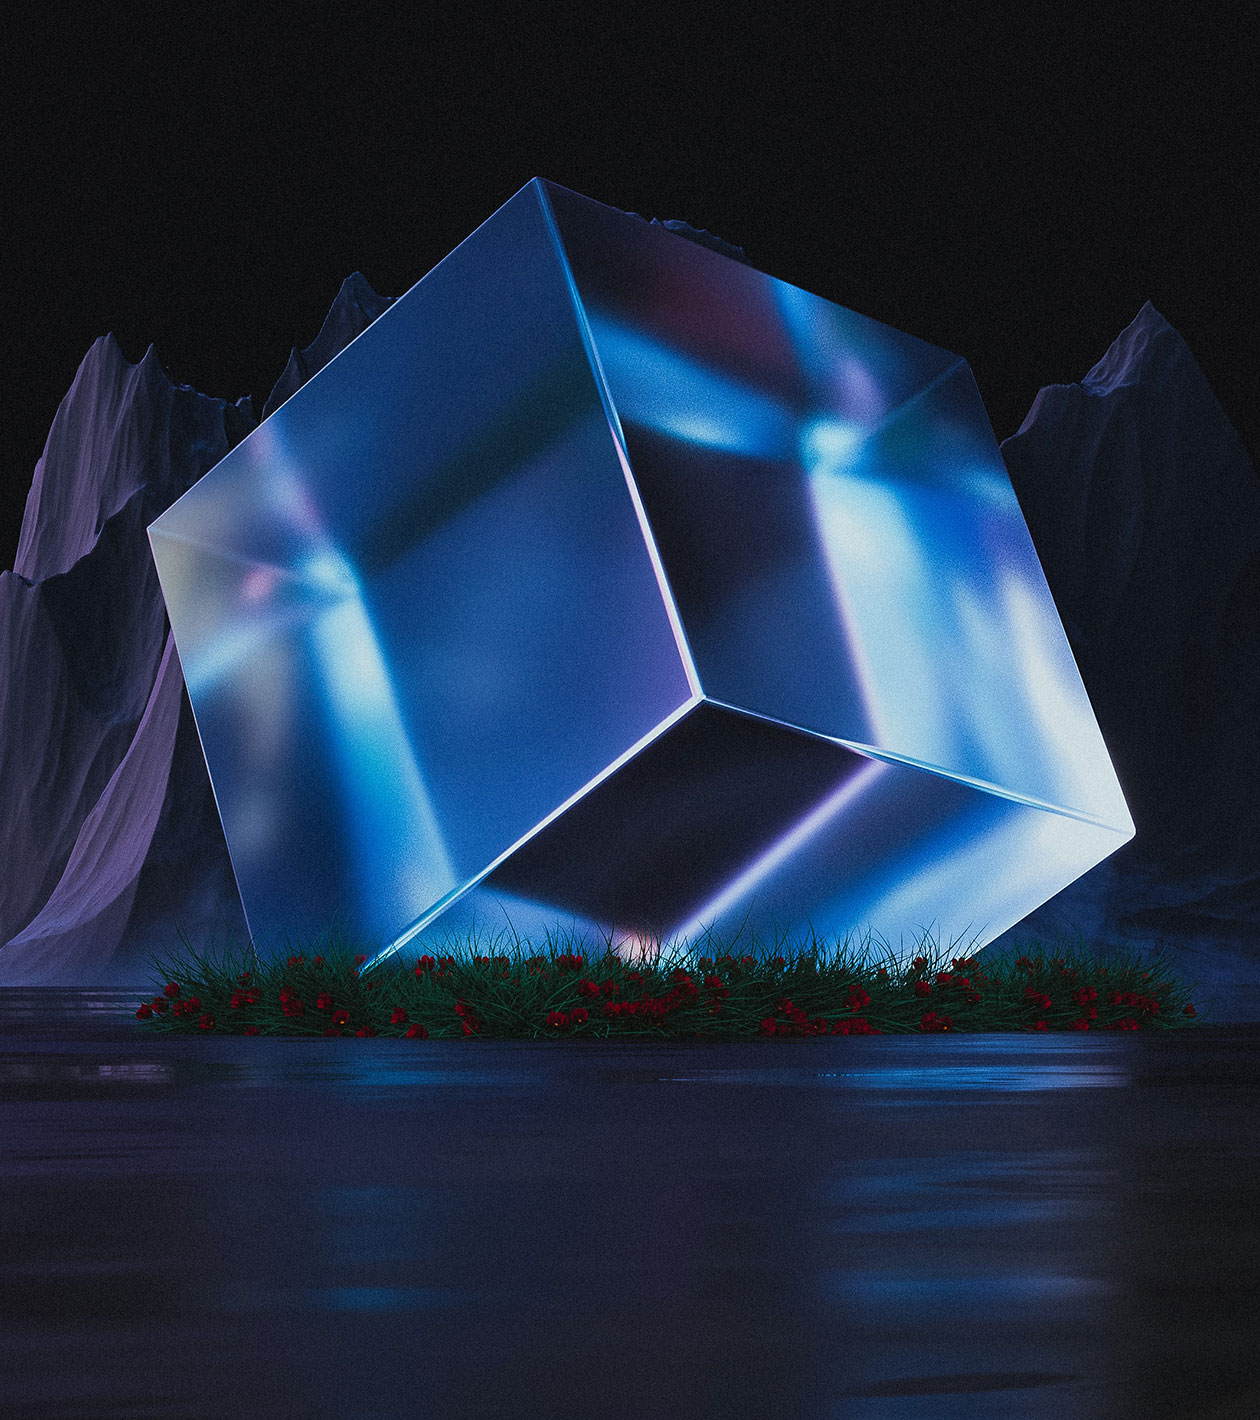 Photo of a cube in grass